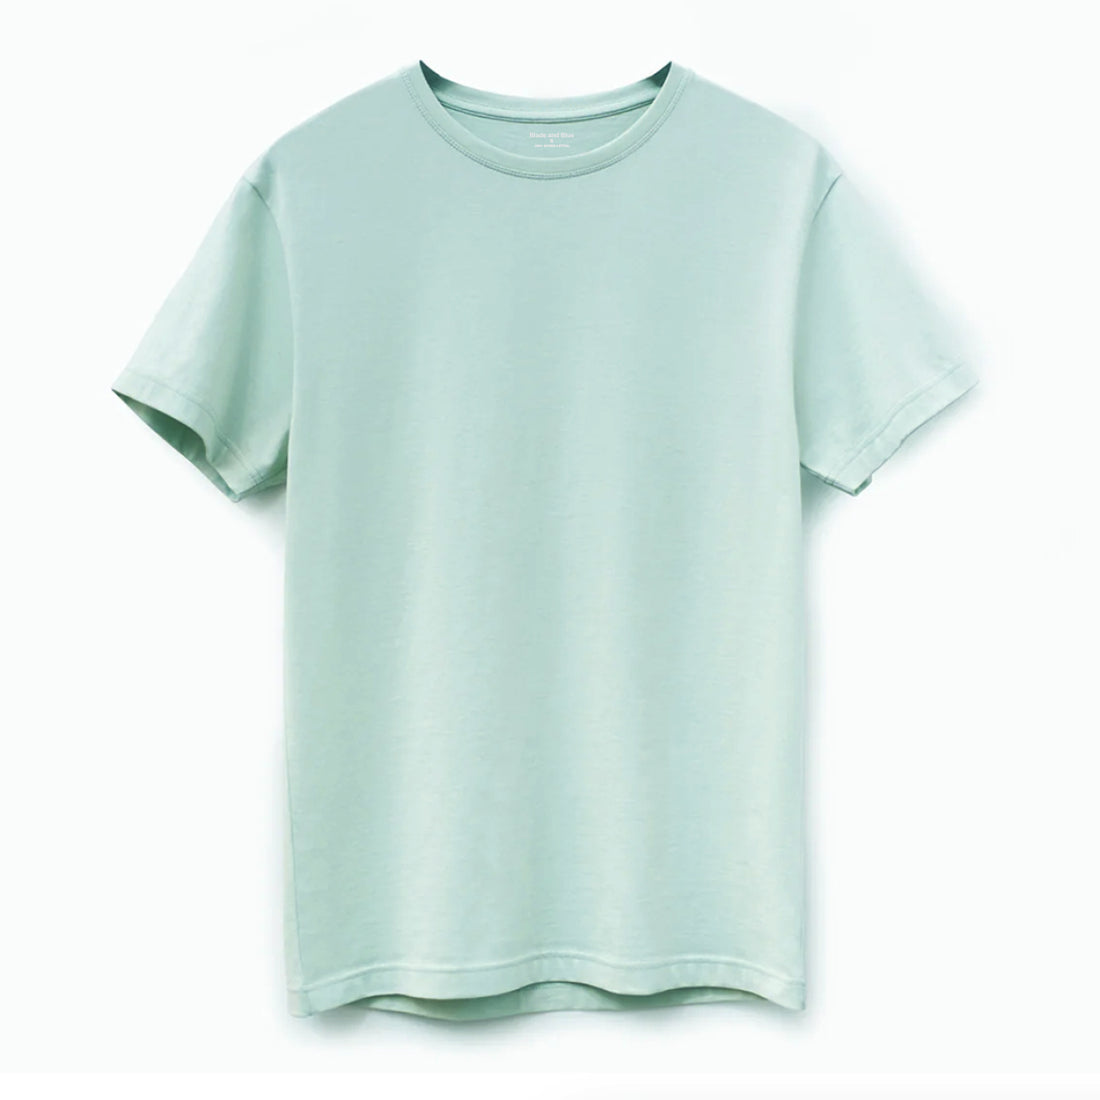 American Grown Supima 100% Cotton T-Shirt in Mint